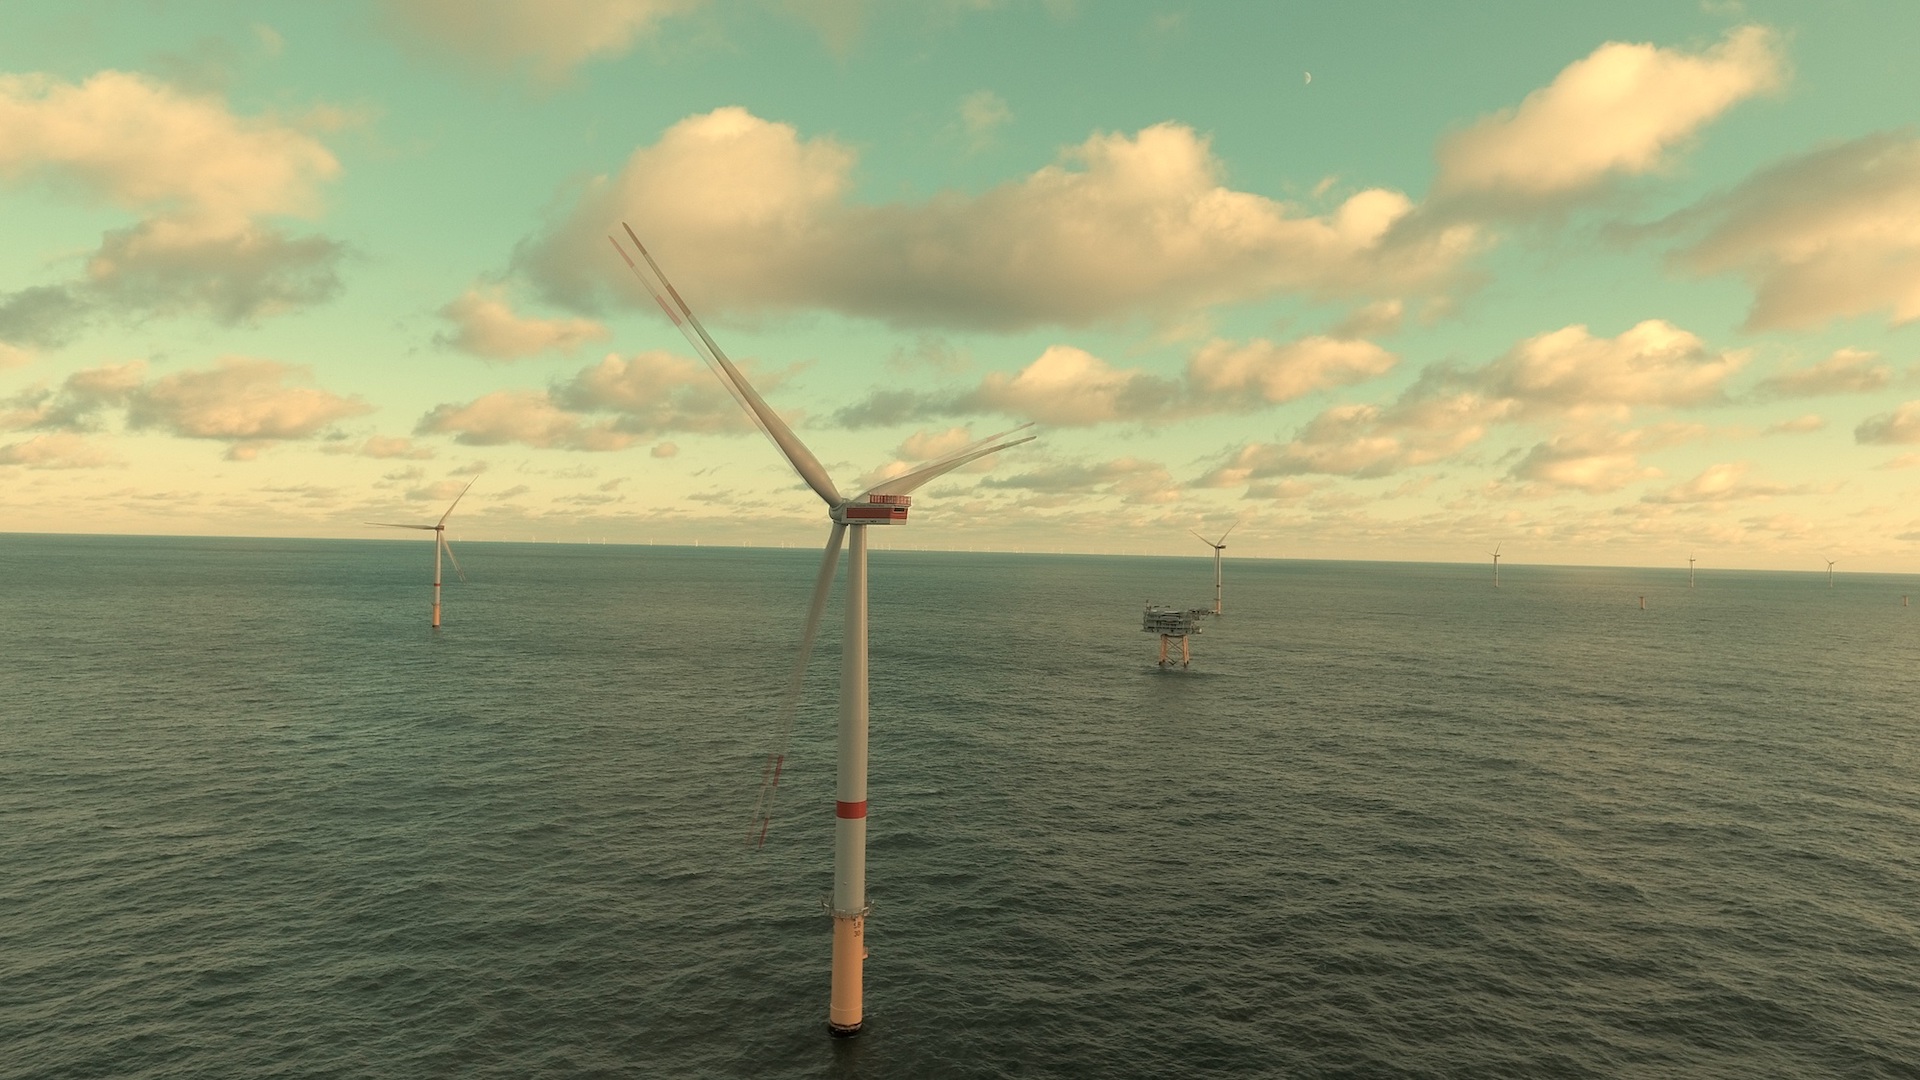 A photo of the Sandbank offshore wind farm in Germany